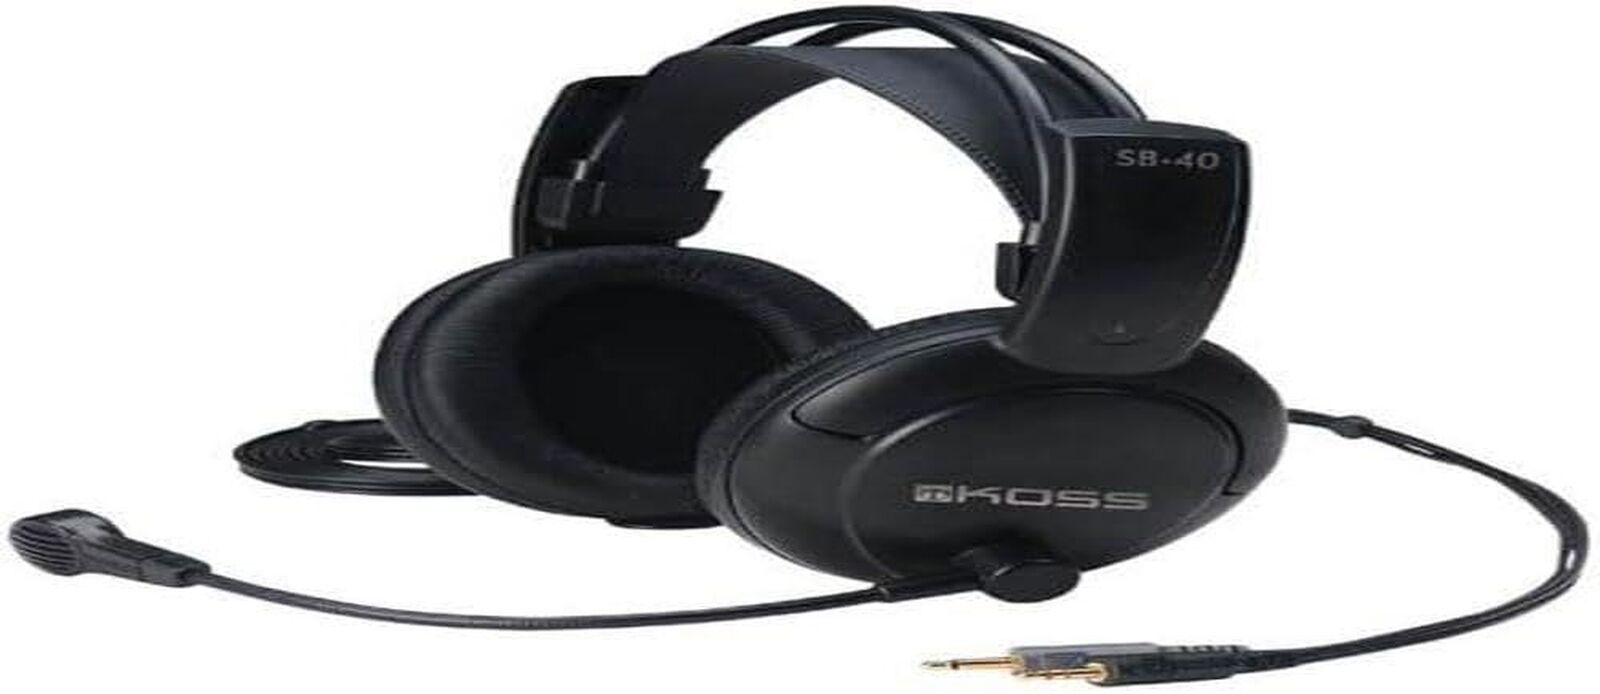 Koss SB40 Computer Headset with Microphone, Black One Size